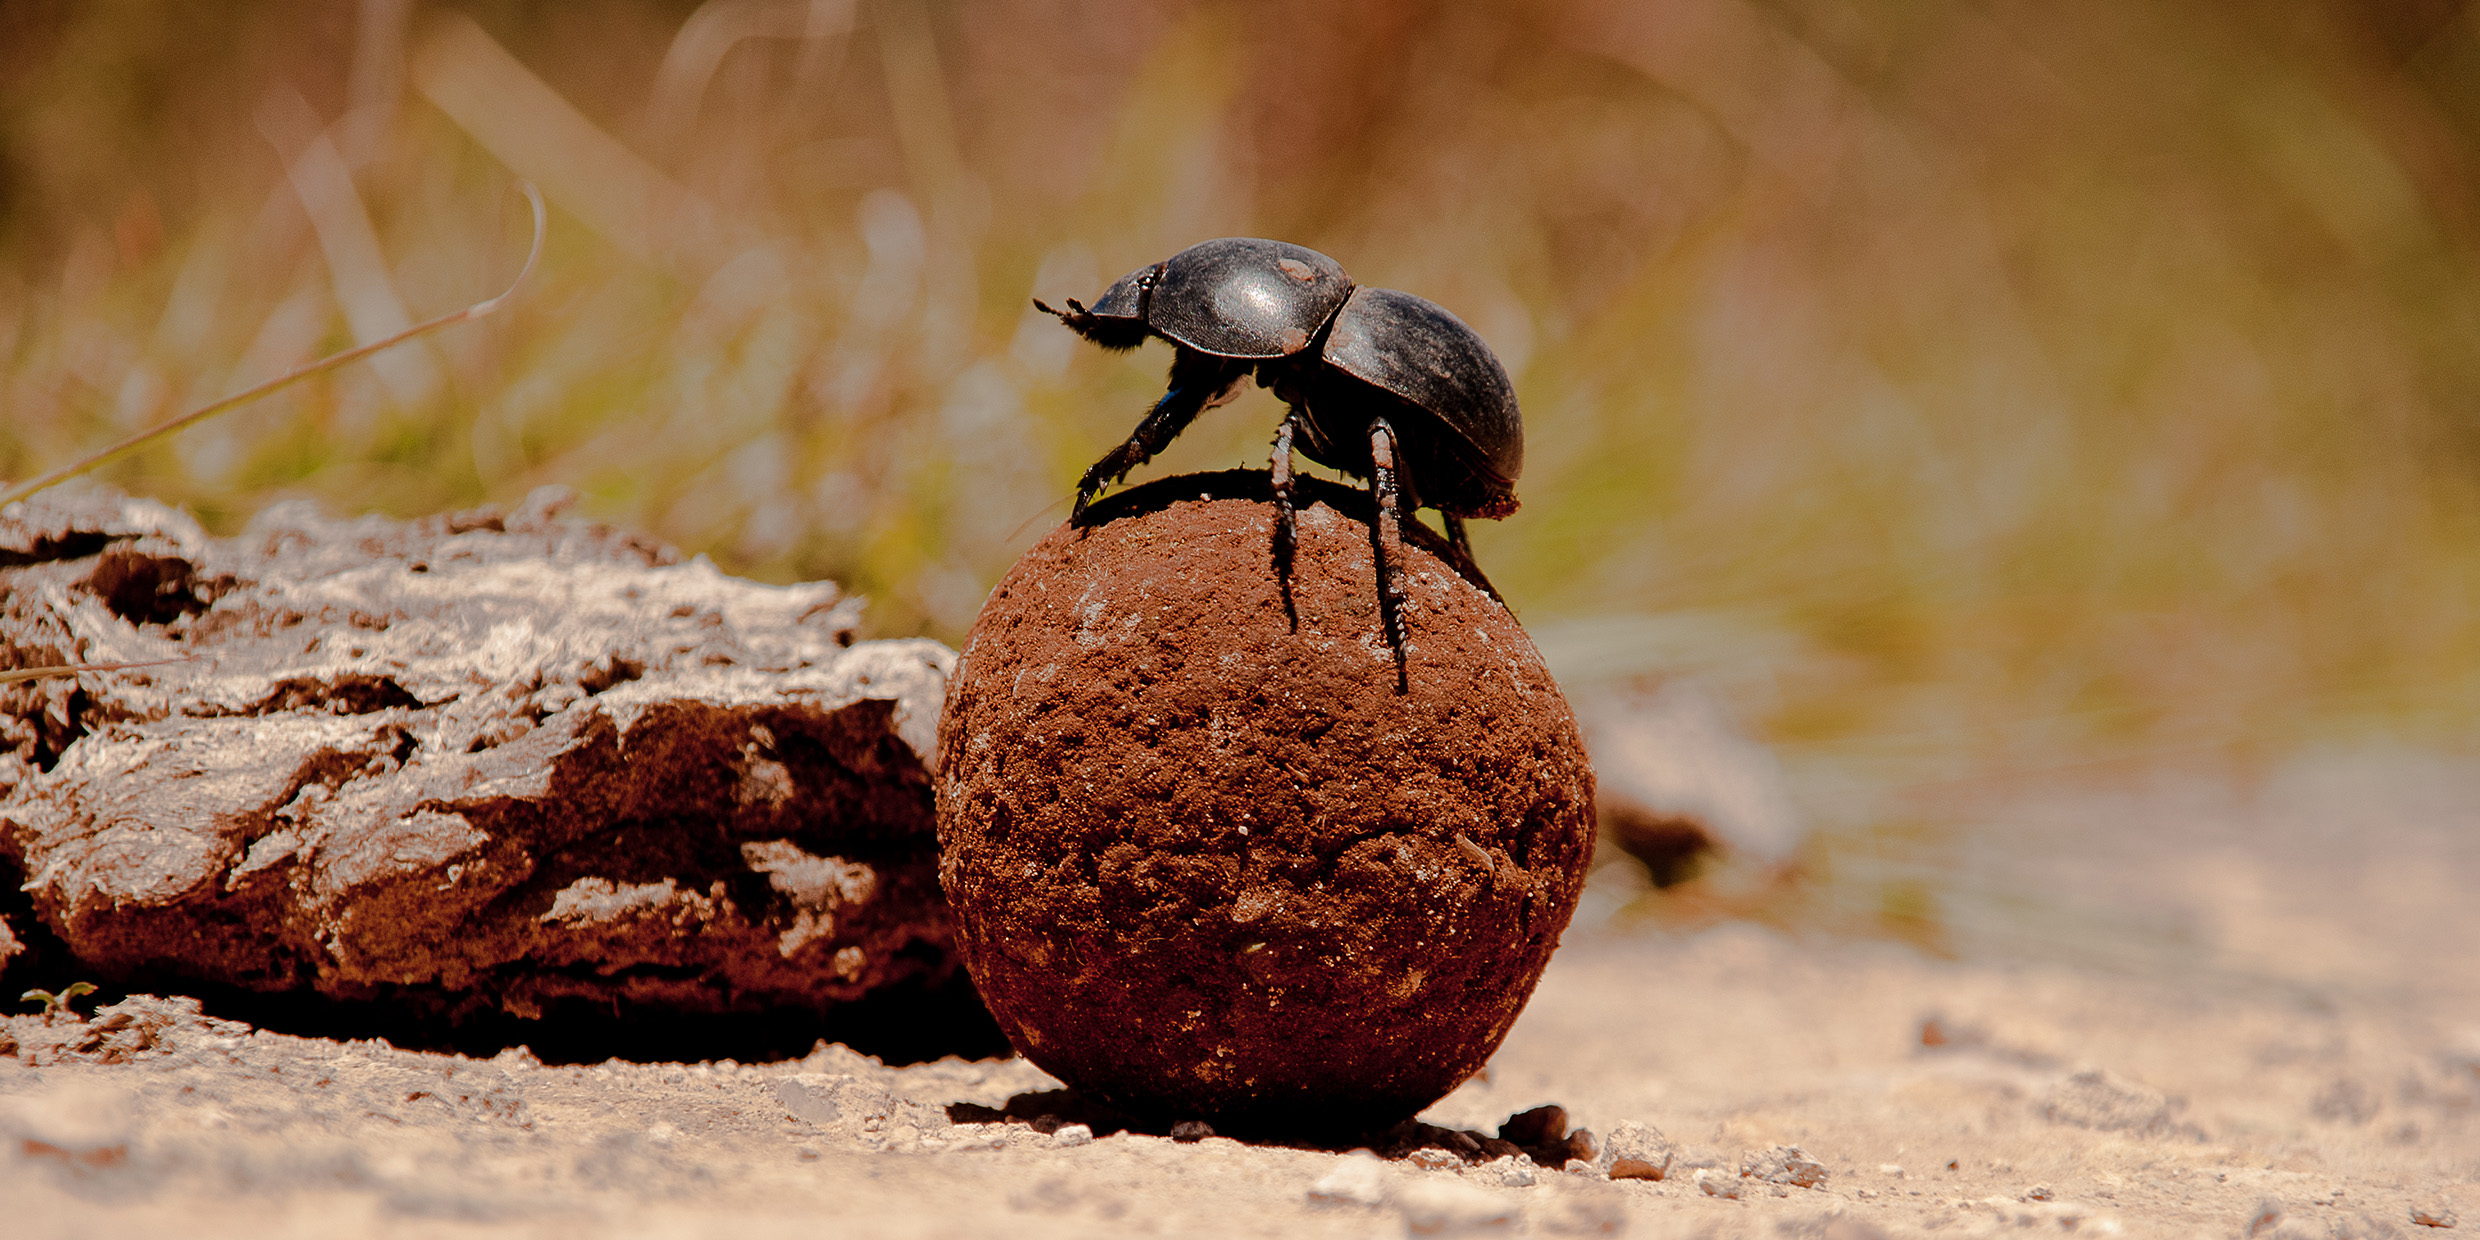 Image of beetle atop a ball of dung